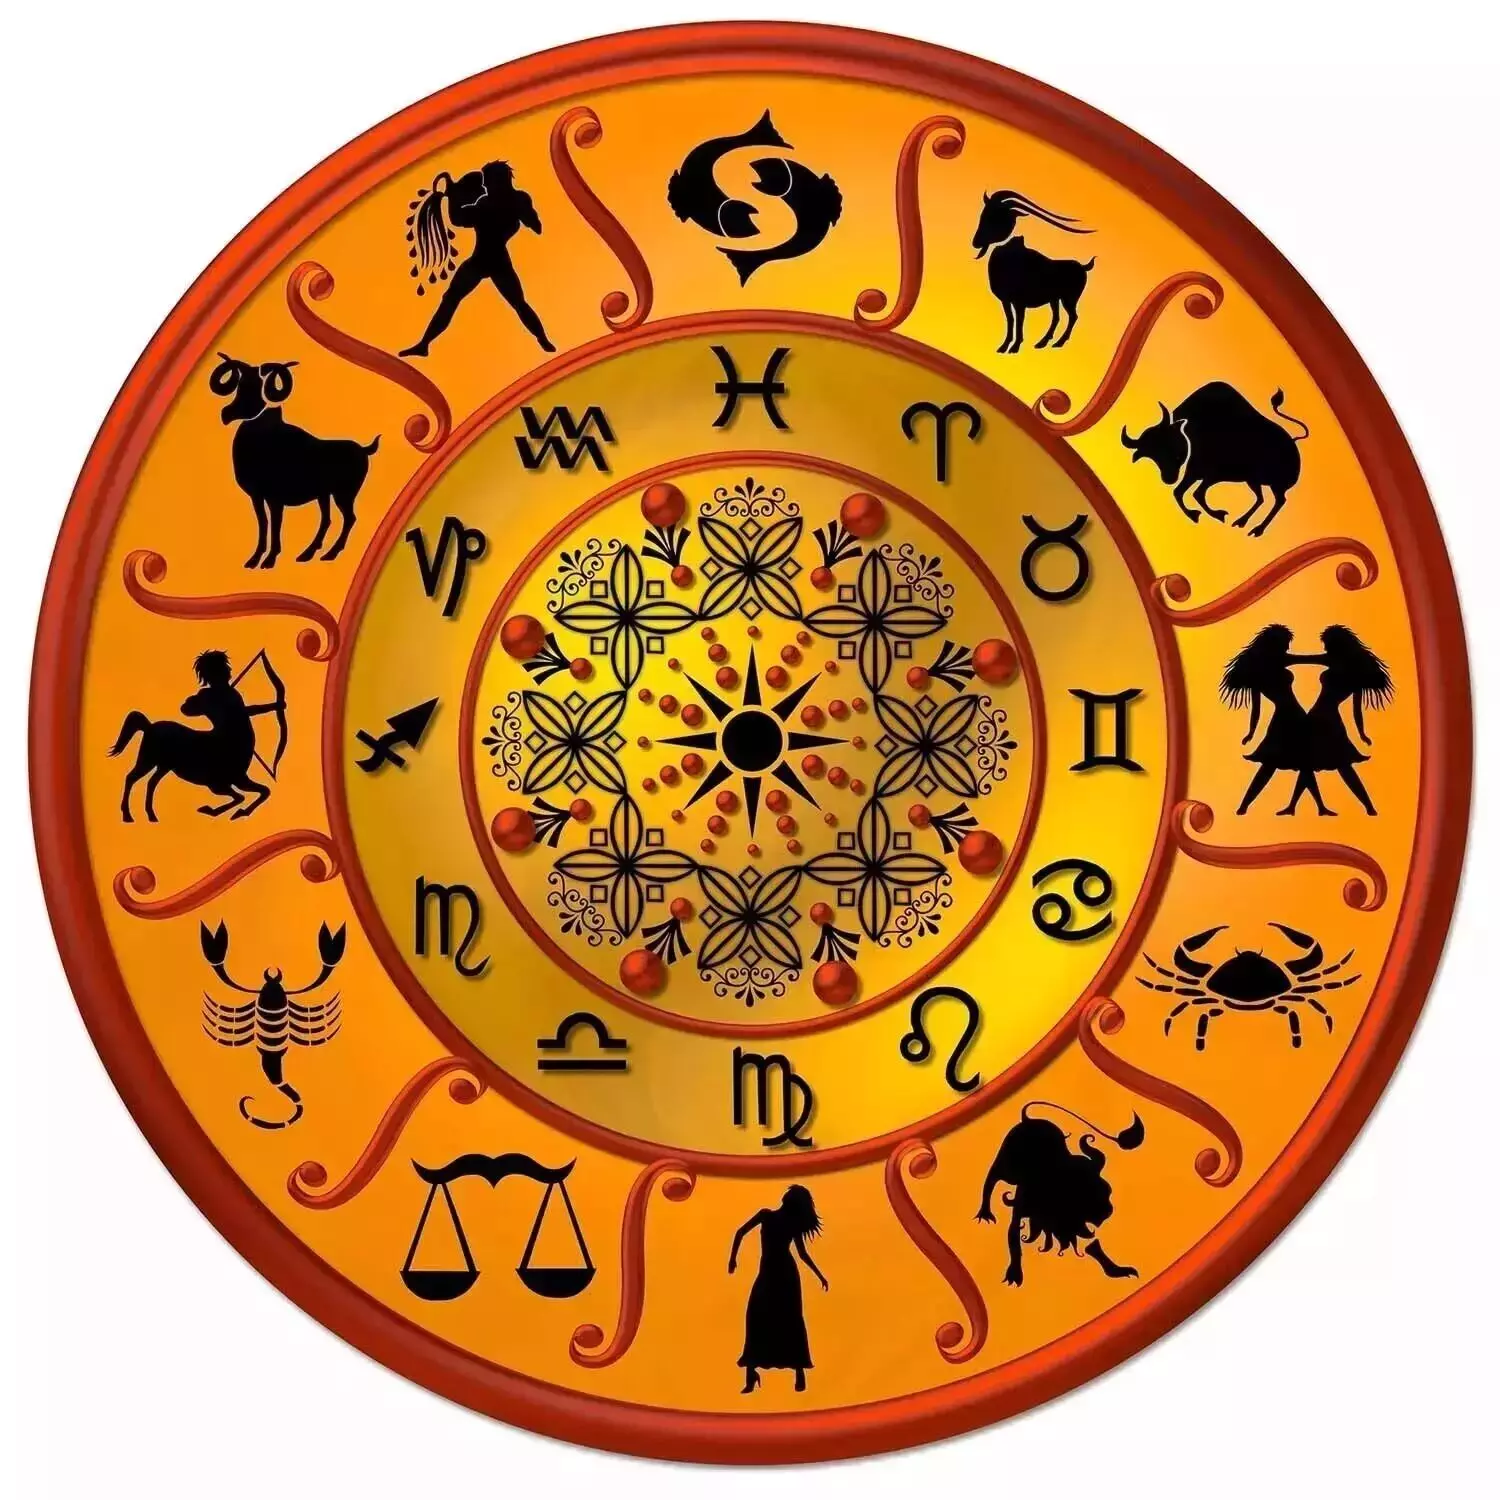 27 March  – Know your todays horoscope